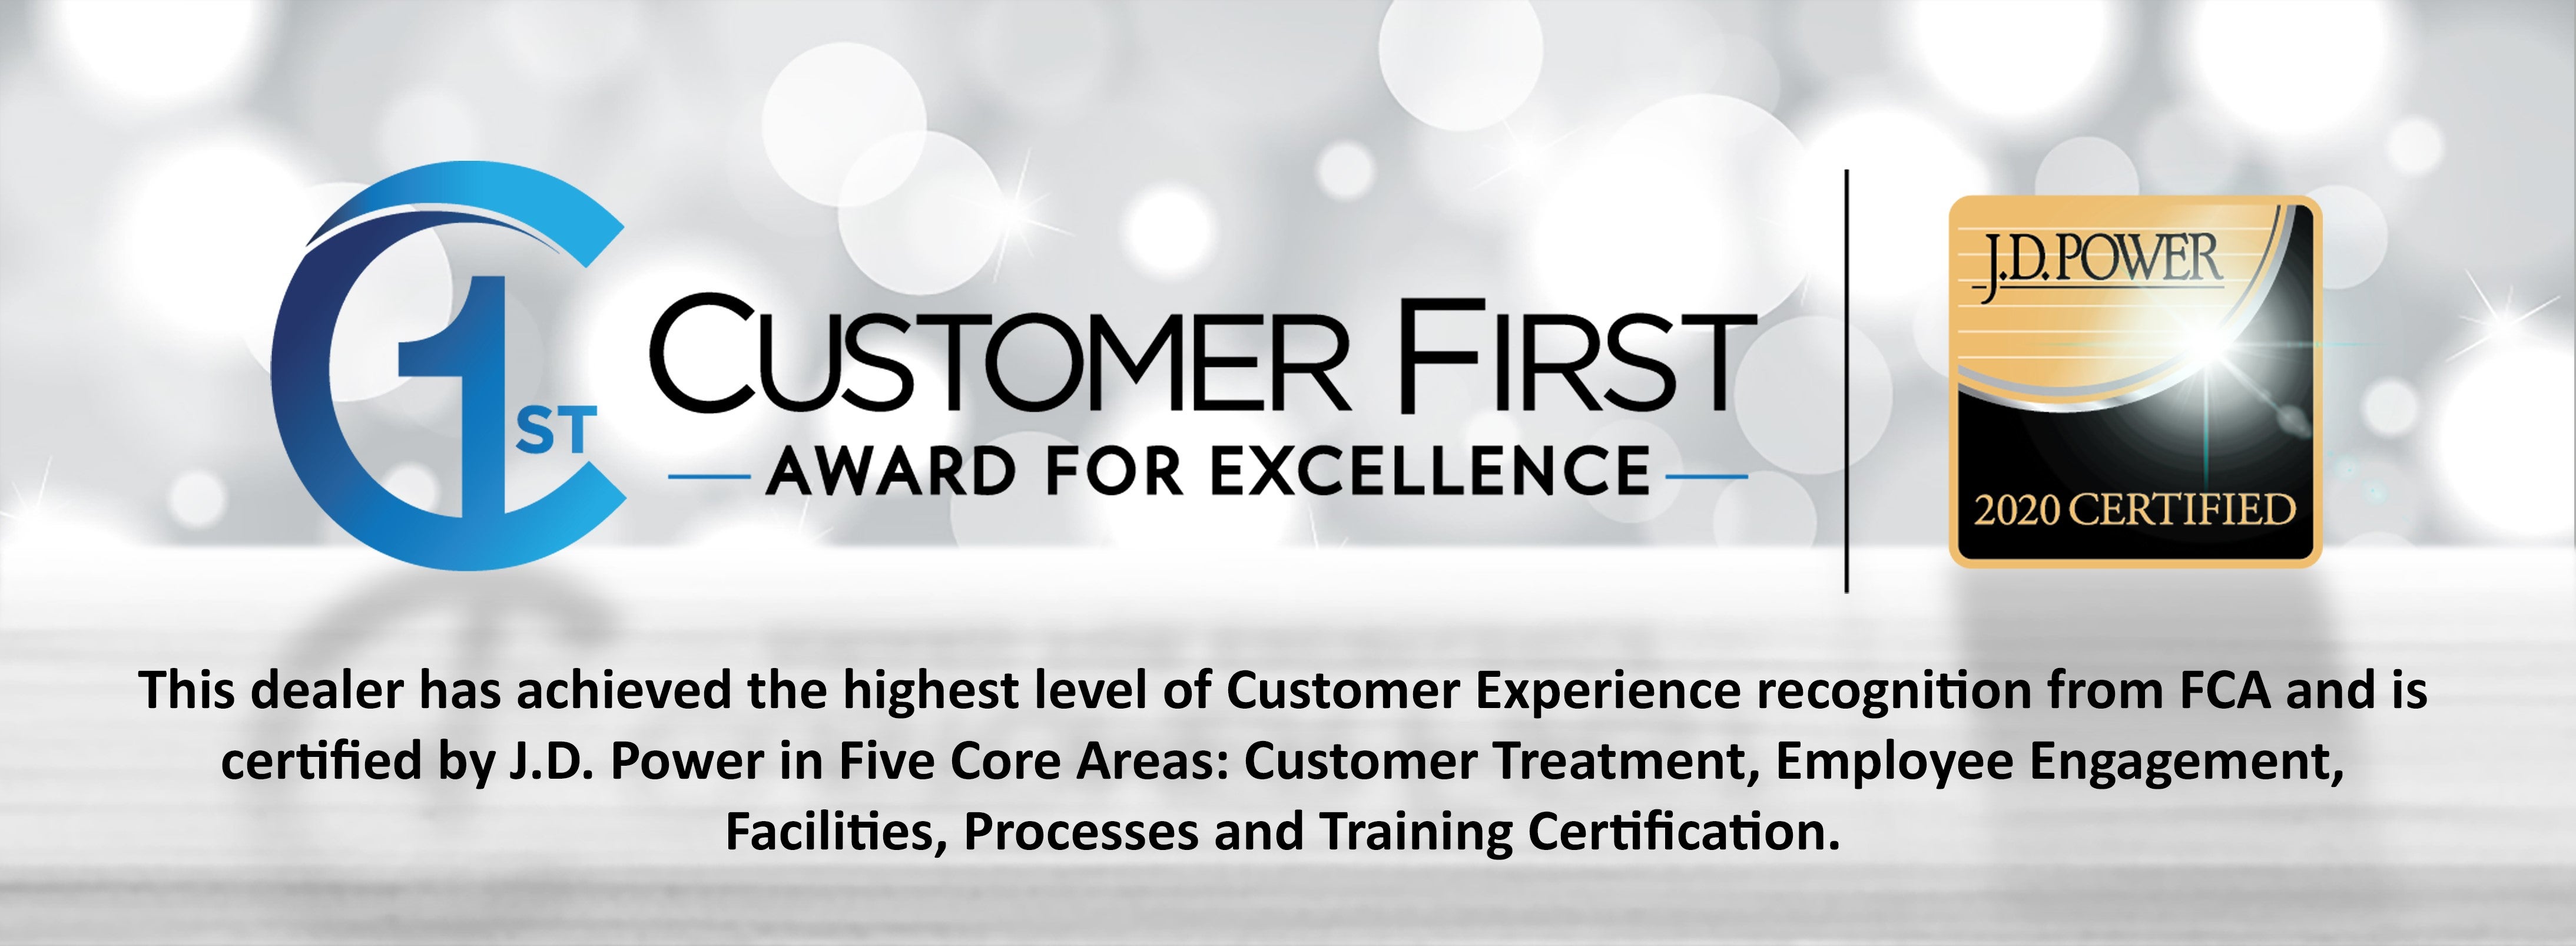 Customer First Award for Excellence for 2019 at Hosick Motors Inc- CDJR in Vandalia, IL